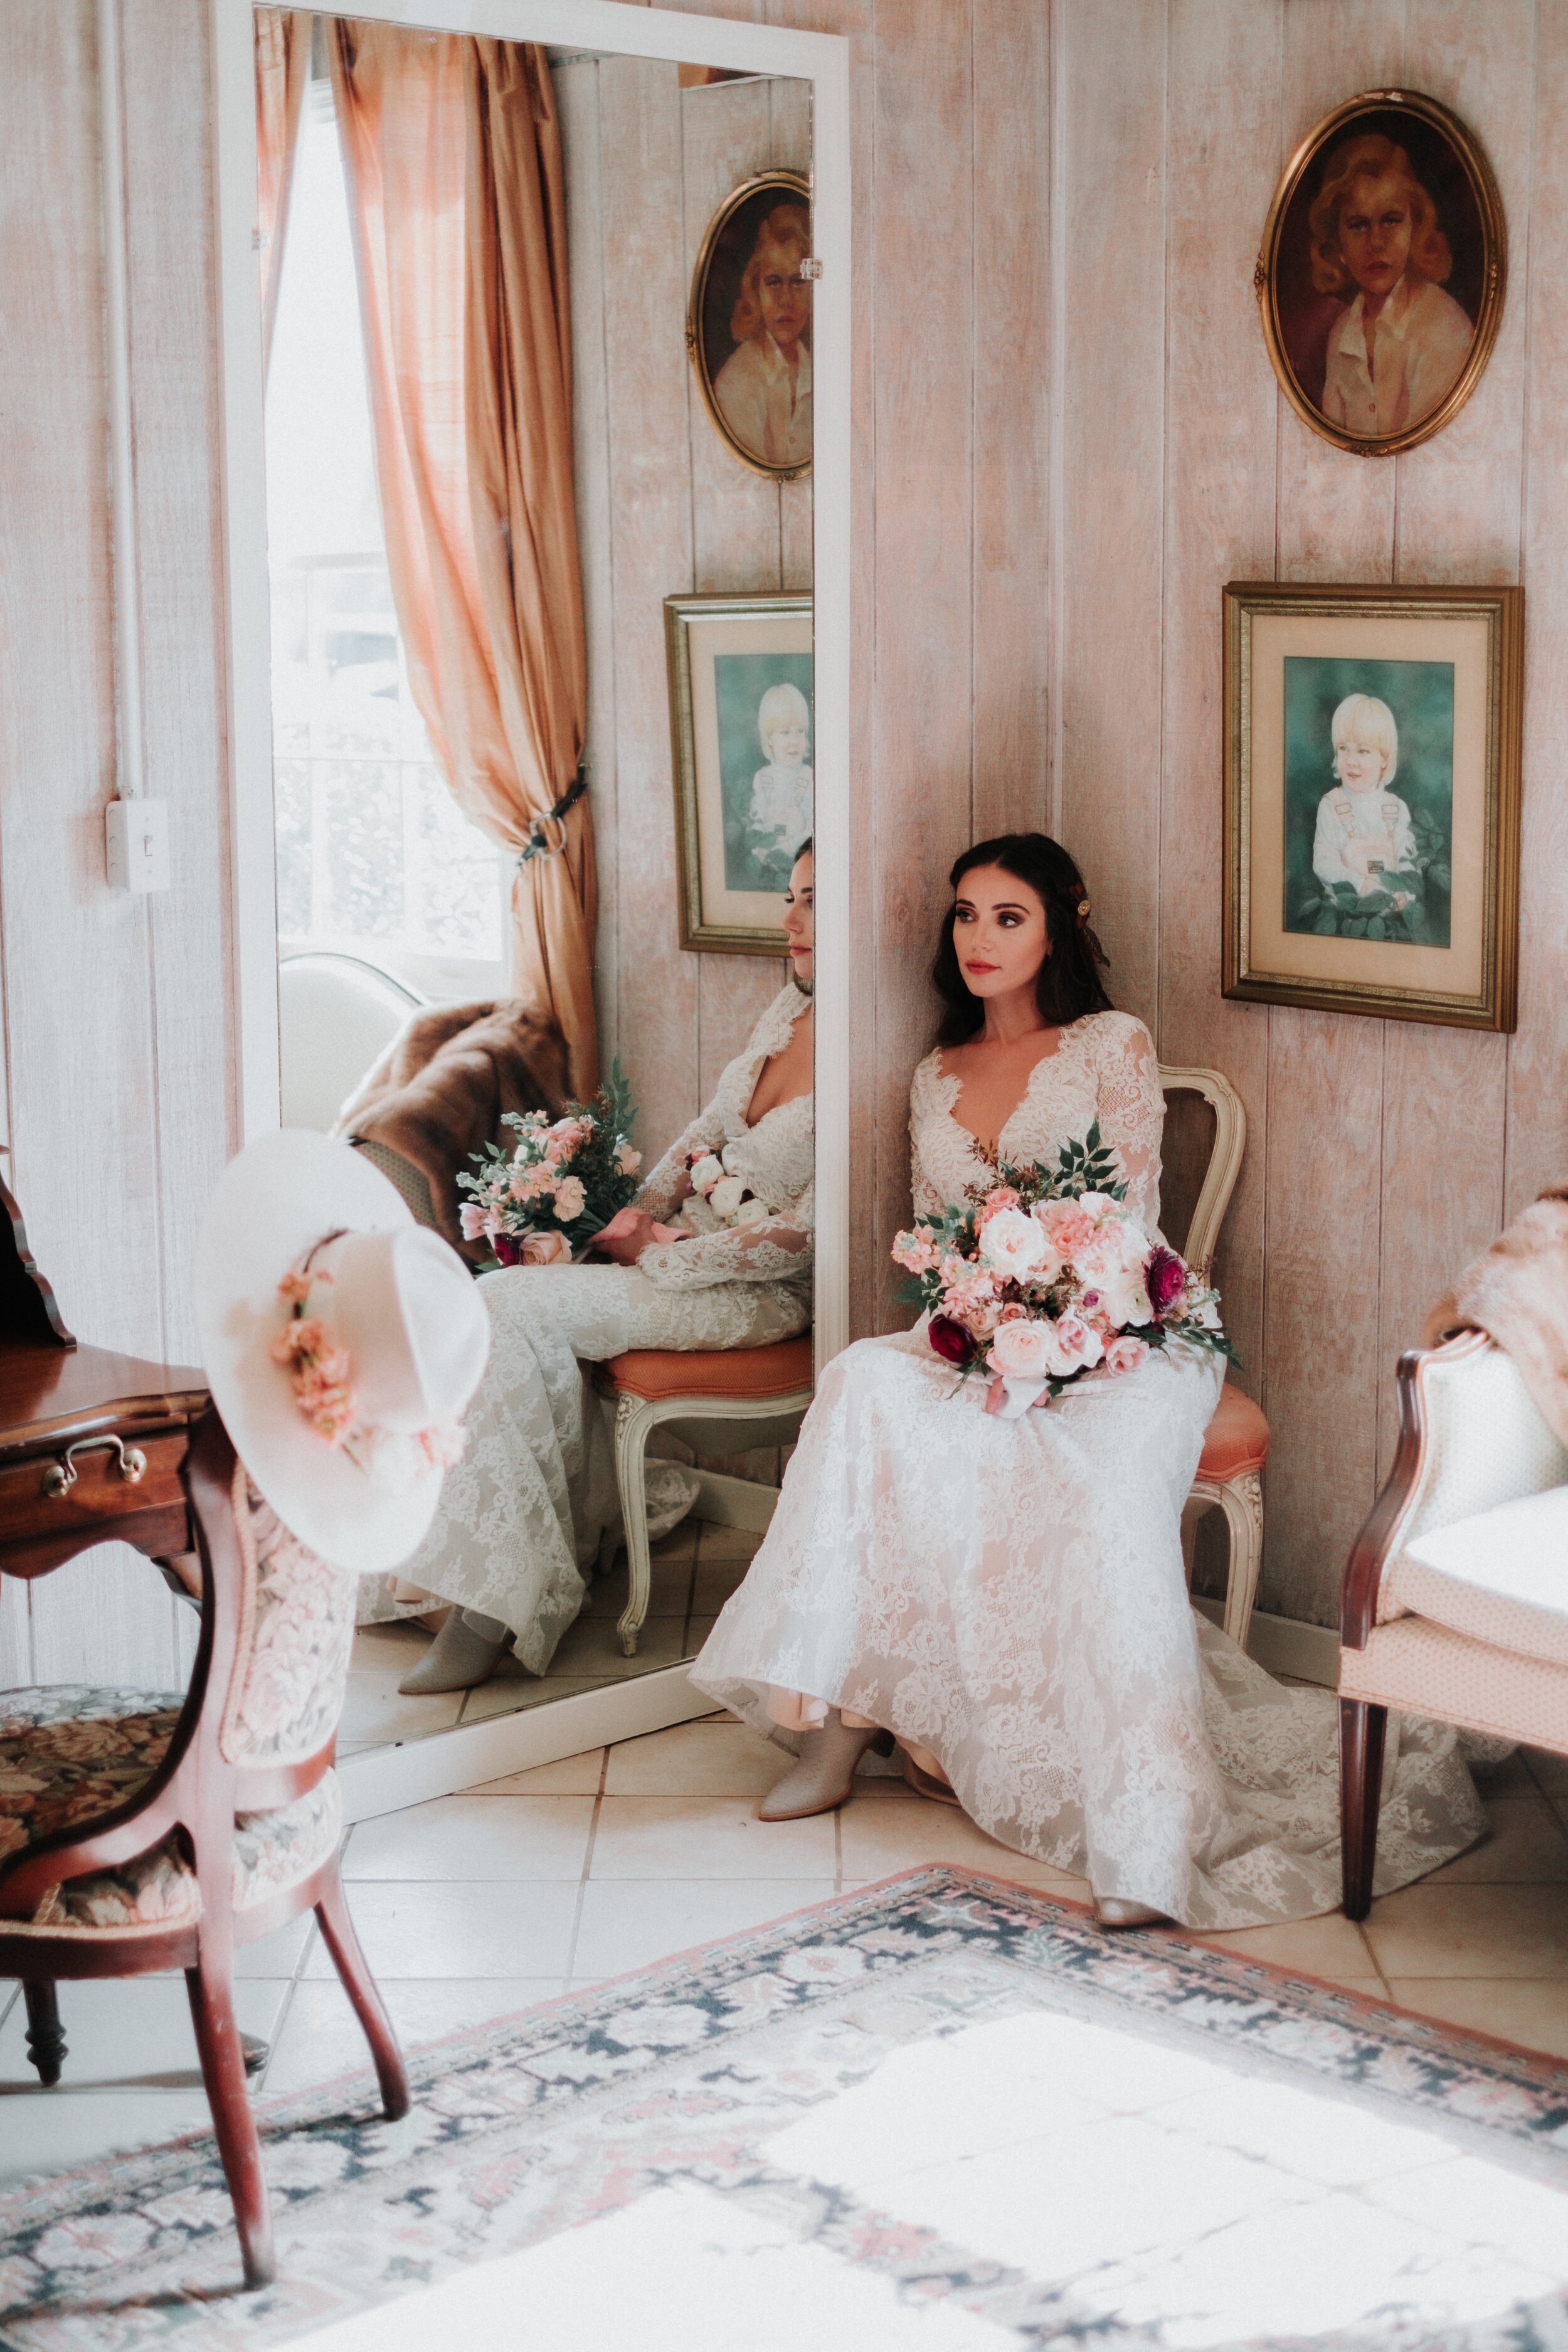 ivory-and-beau-blog-featured-in-south-magazine-bridal-shop-bridal-boutique-wedding-dresses-bridal-gown-wedding-gown-styled-shoot-photo-shoot-wedding-inspiration-Swamp Fox Farms  (24 of 101).jpg